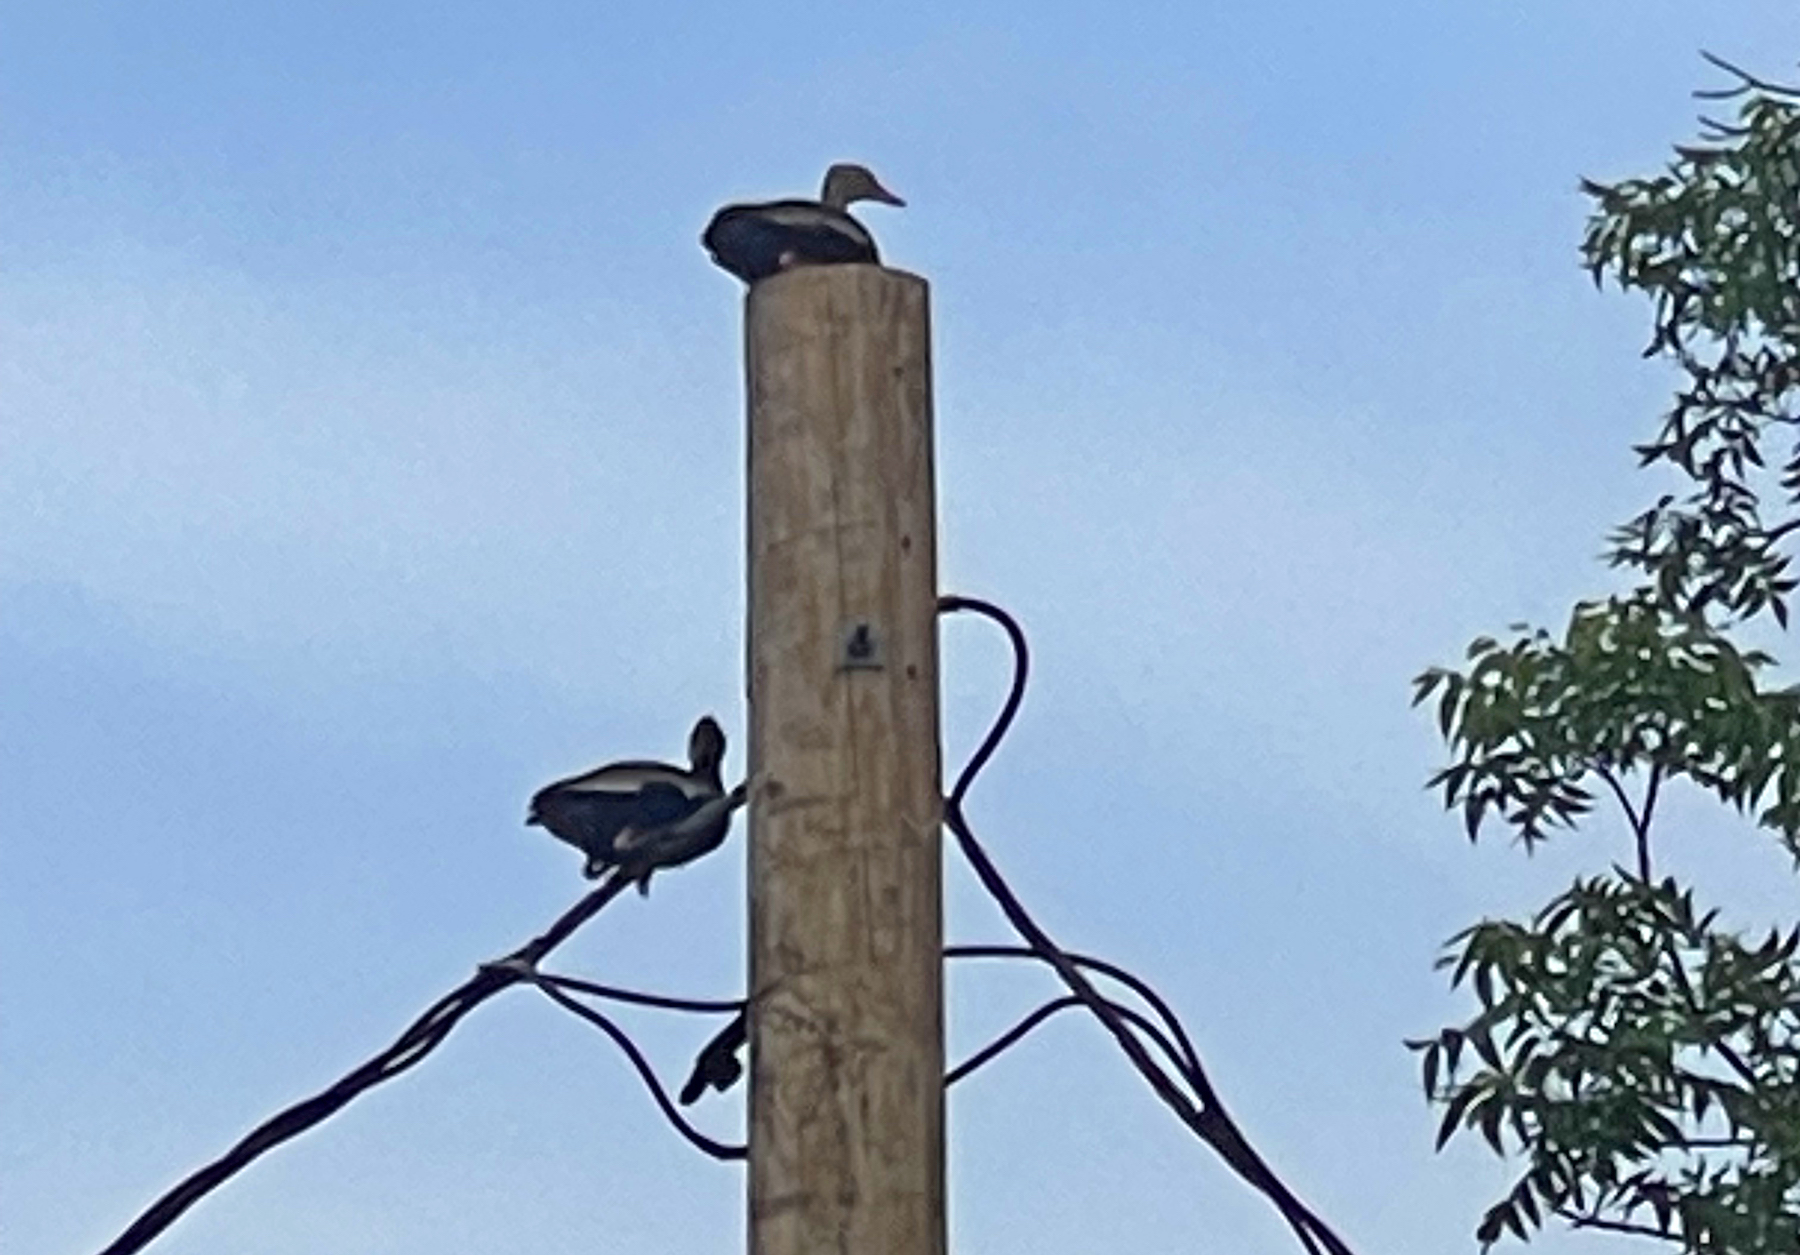 Black-bellied Whistling-Ducks on a Telephone Pole